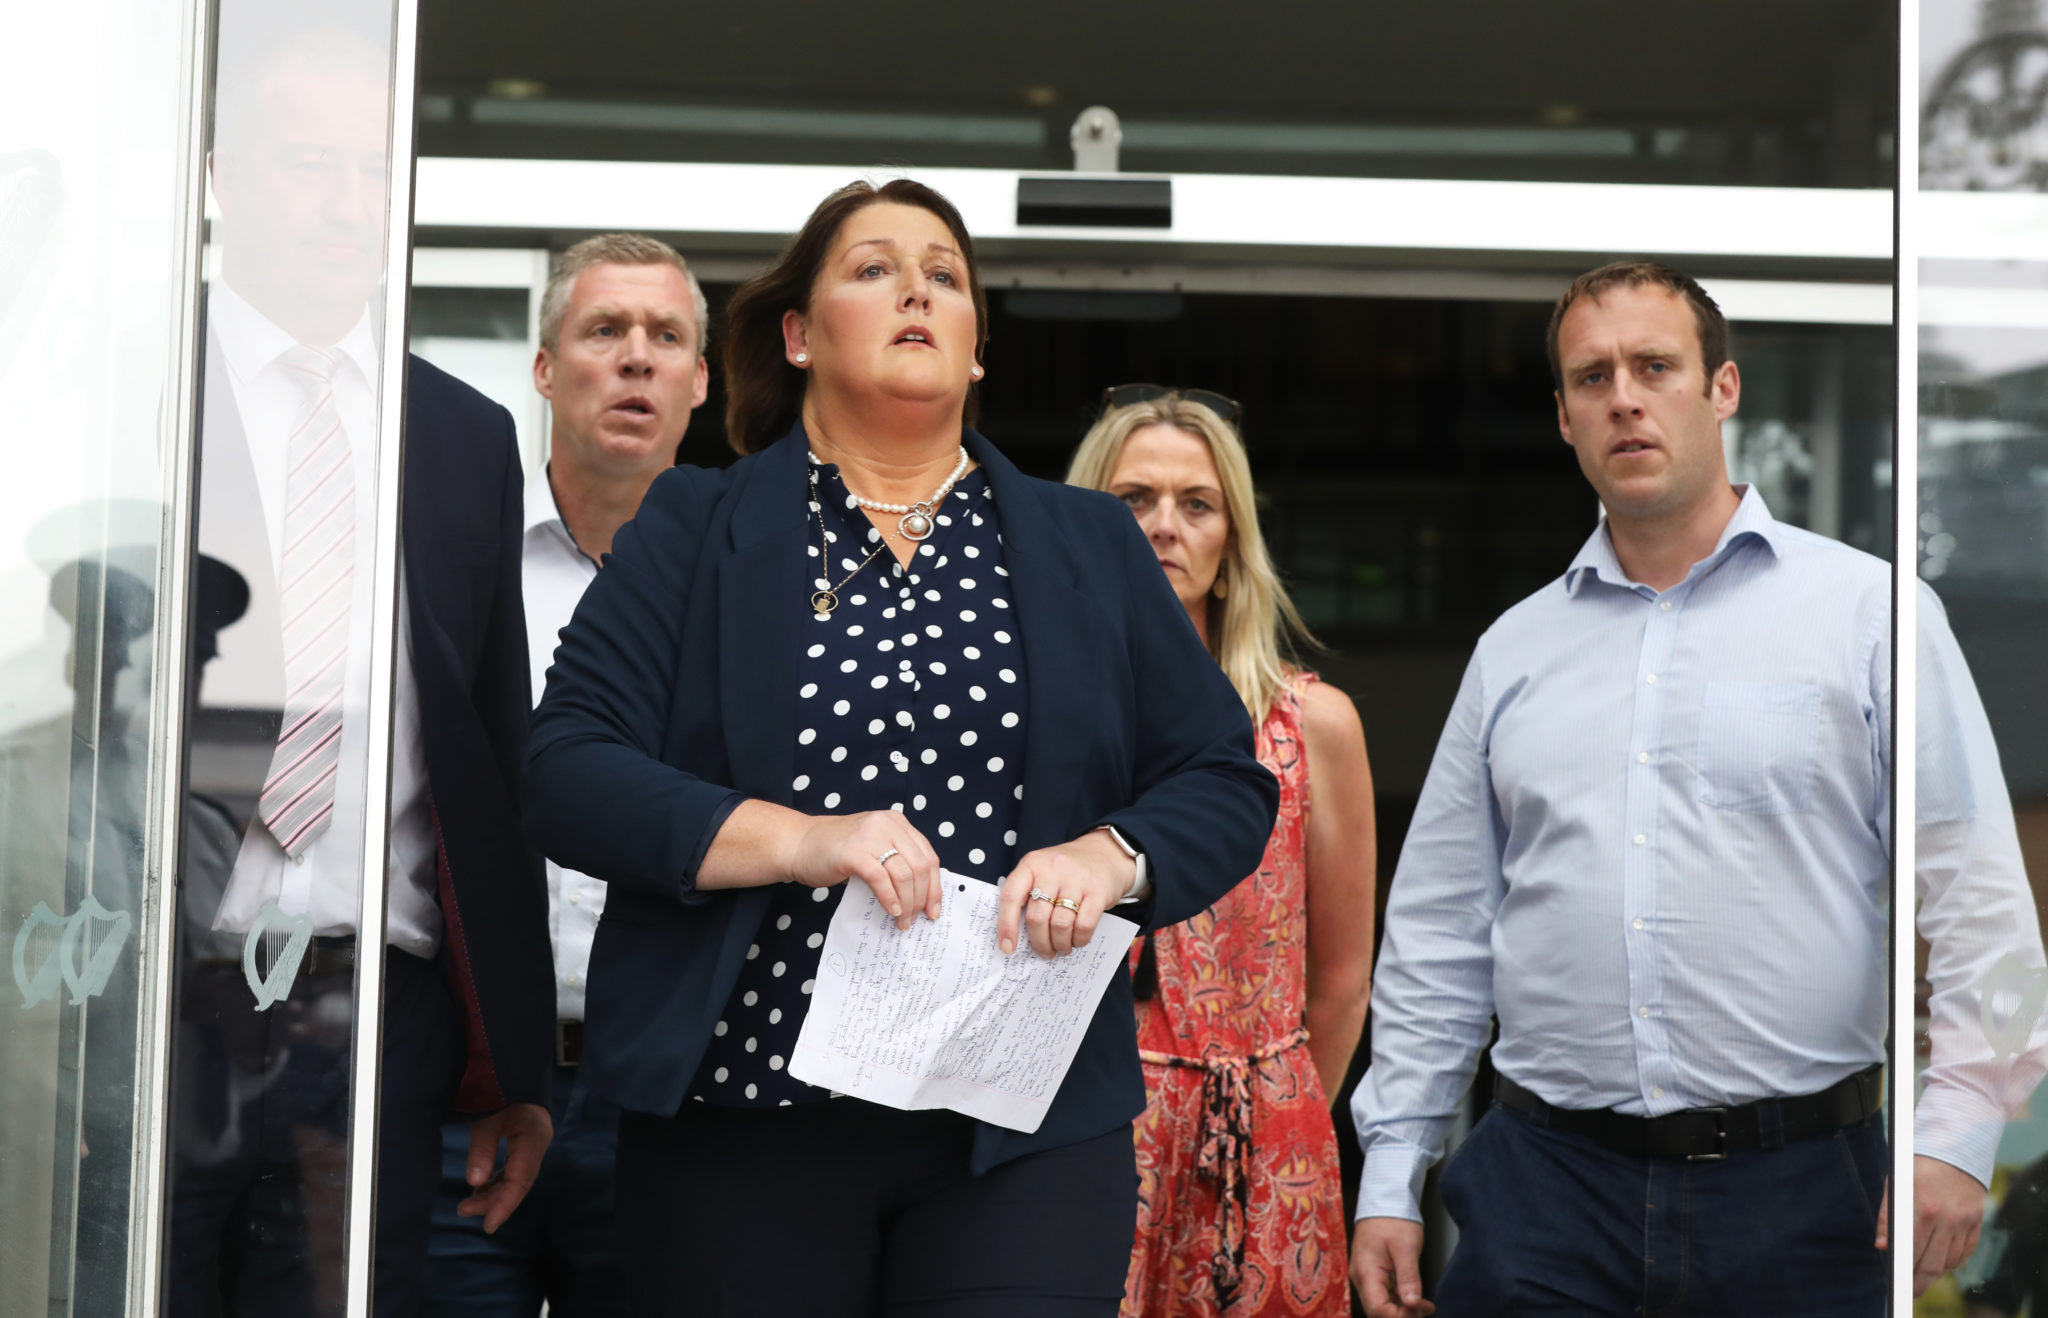 Caroline Donohoe outside the Criminal Courts of Justice after Aaron Brady was found guilty of the capital murder of her husband Garda Detective Adrian Donohoe